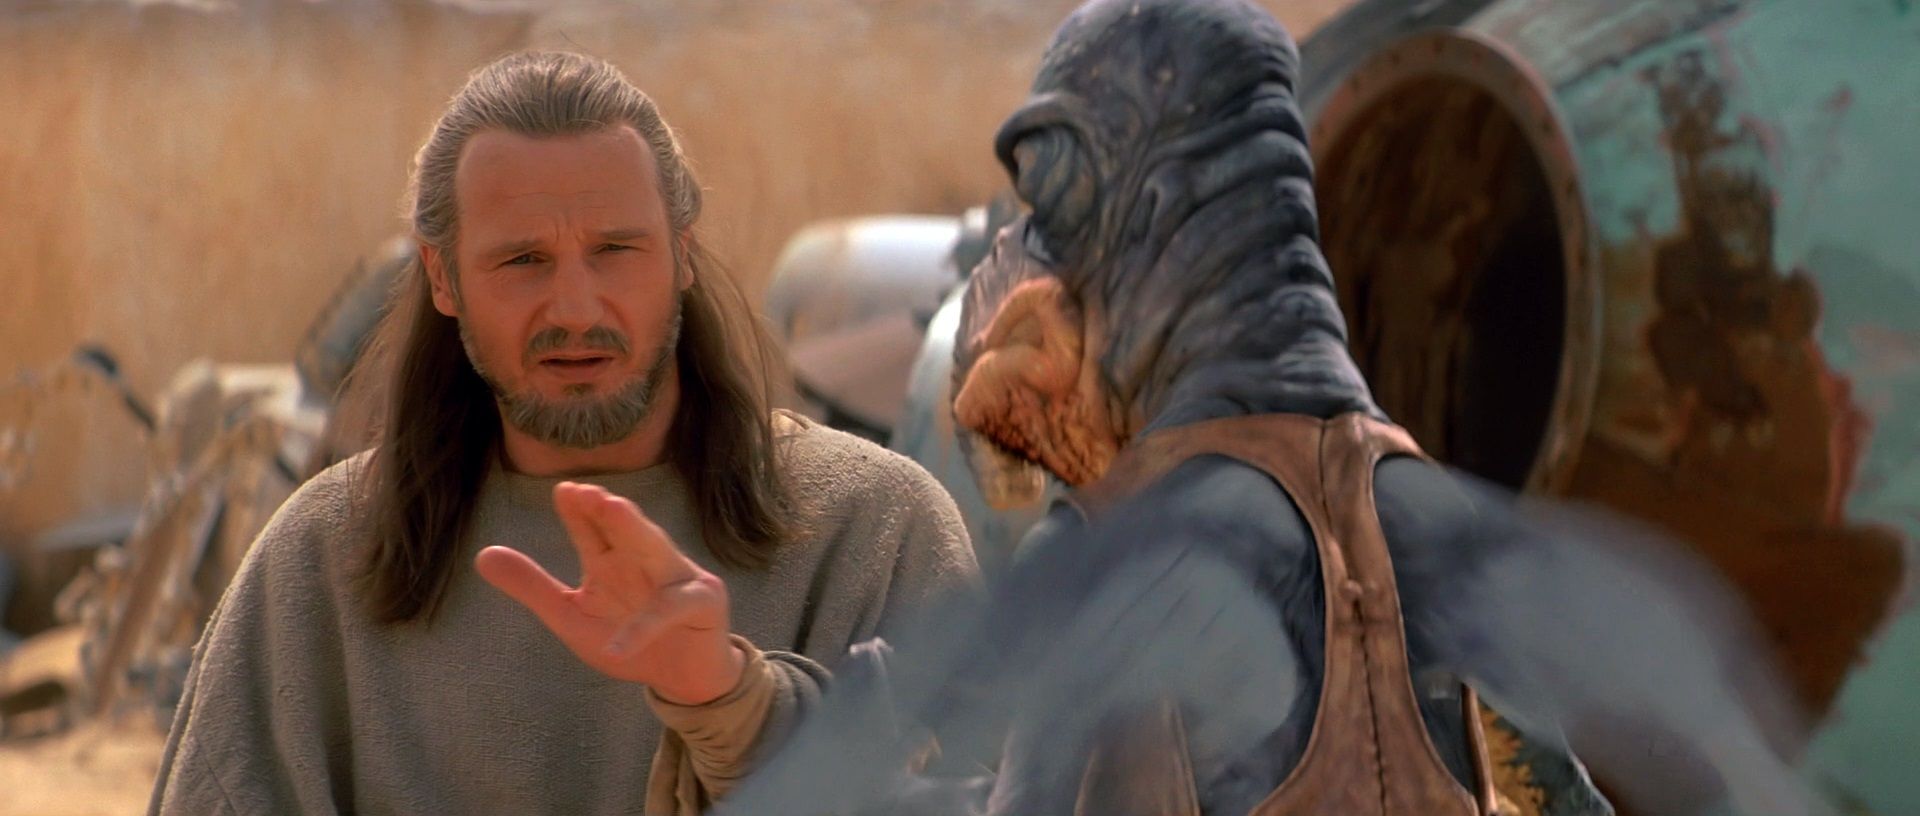 Qui-Gon Jinn and Watto from Star Wars Episode I The Phantom Menace